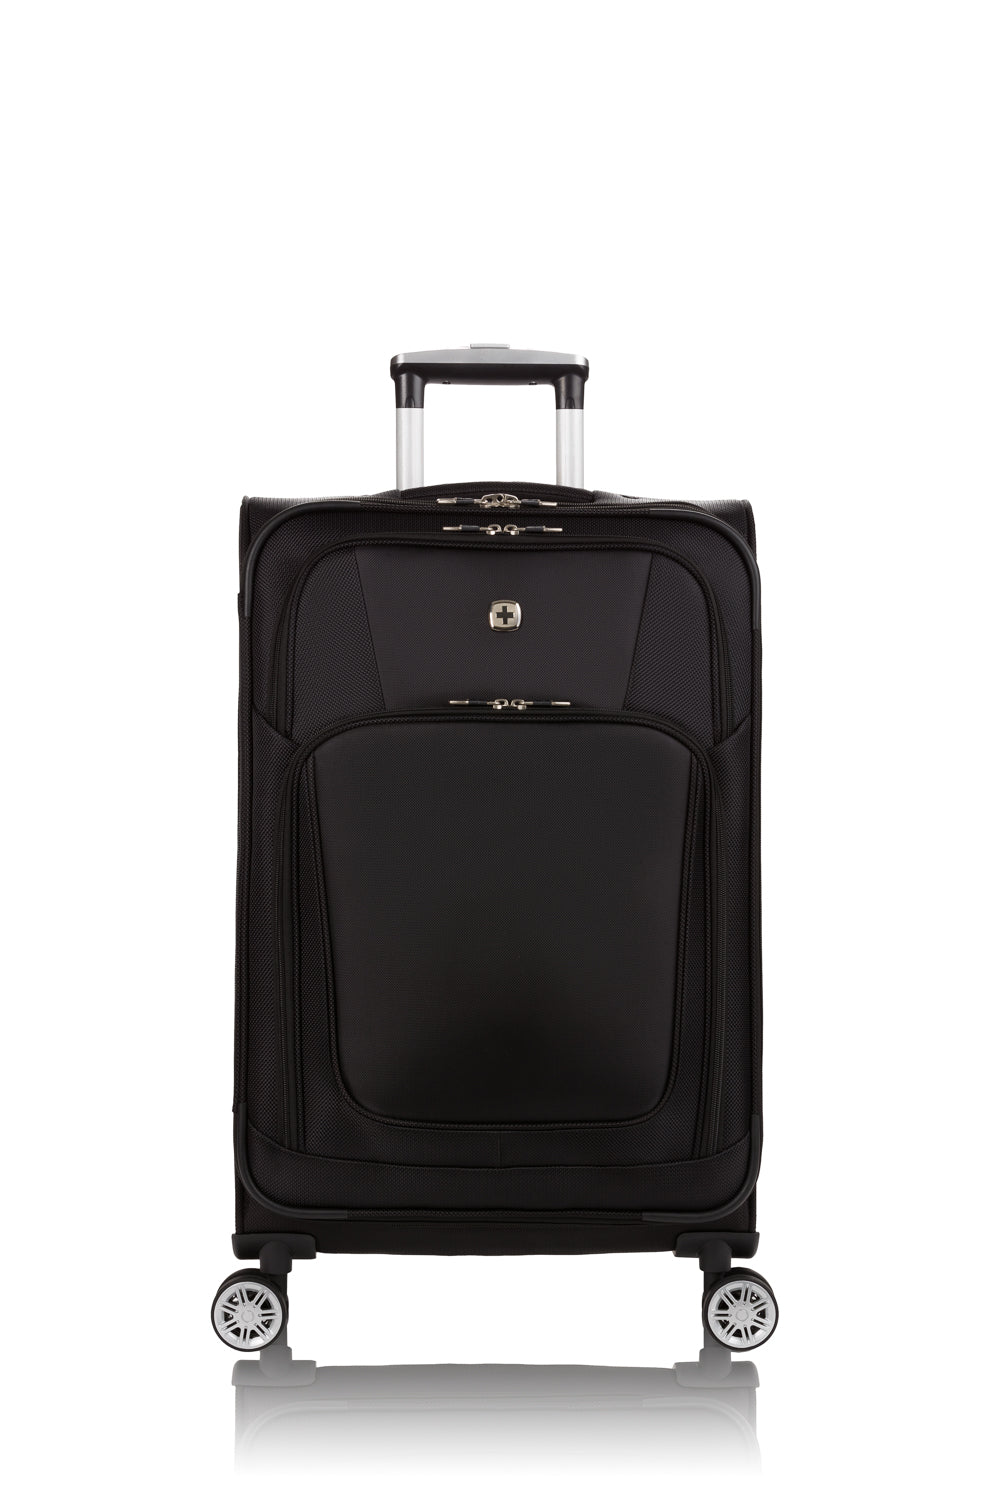 SwissGear 7768 24" Expandable Spinner Suitcase